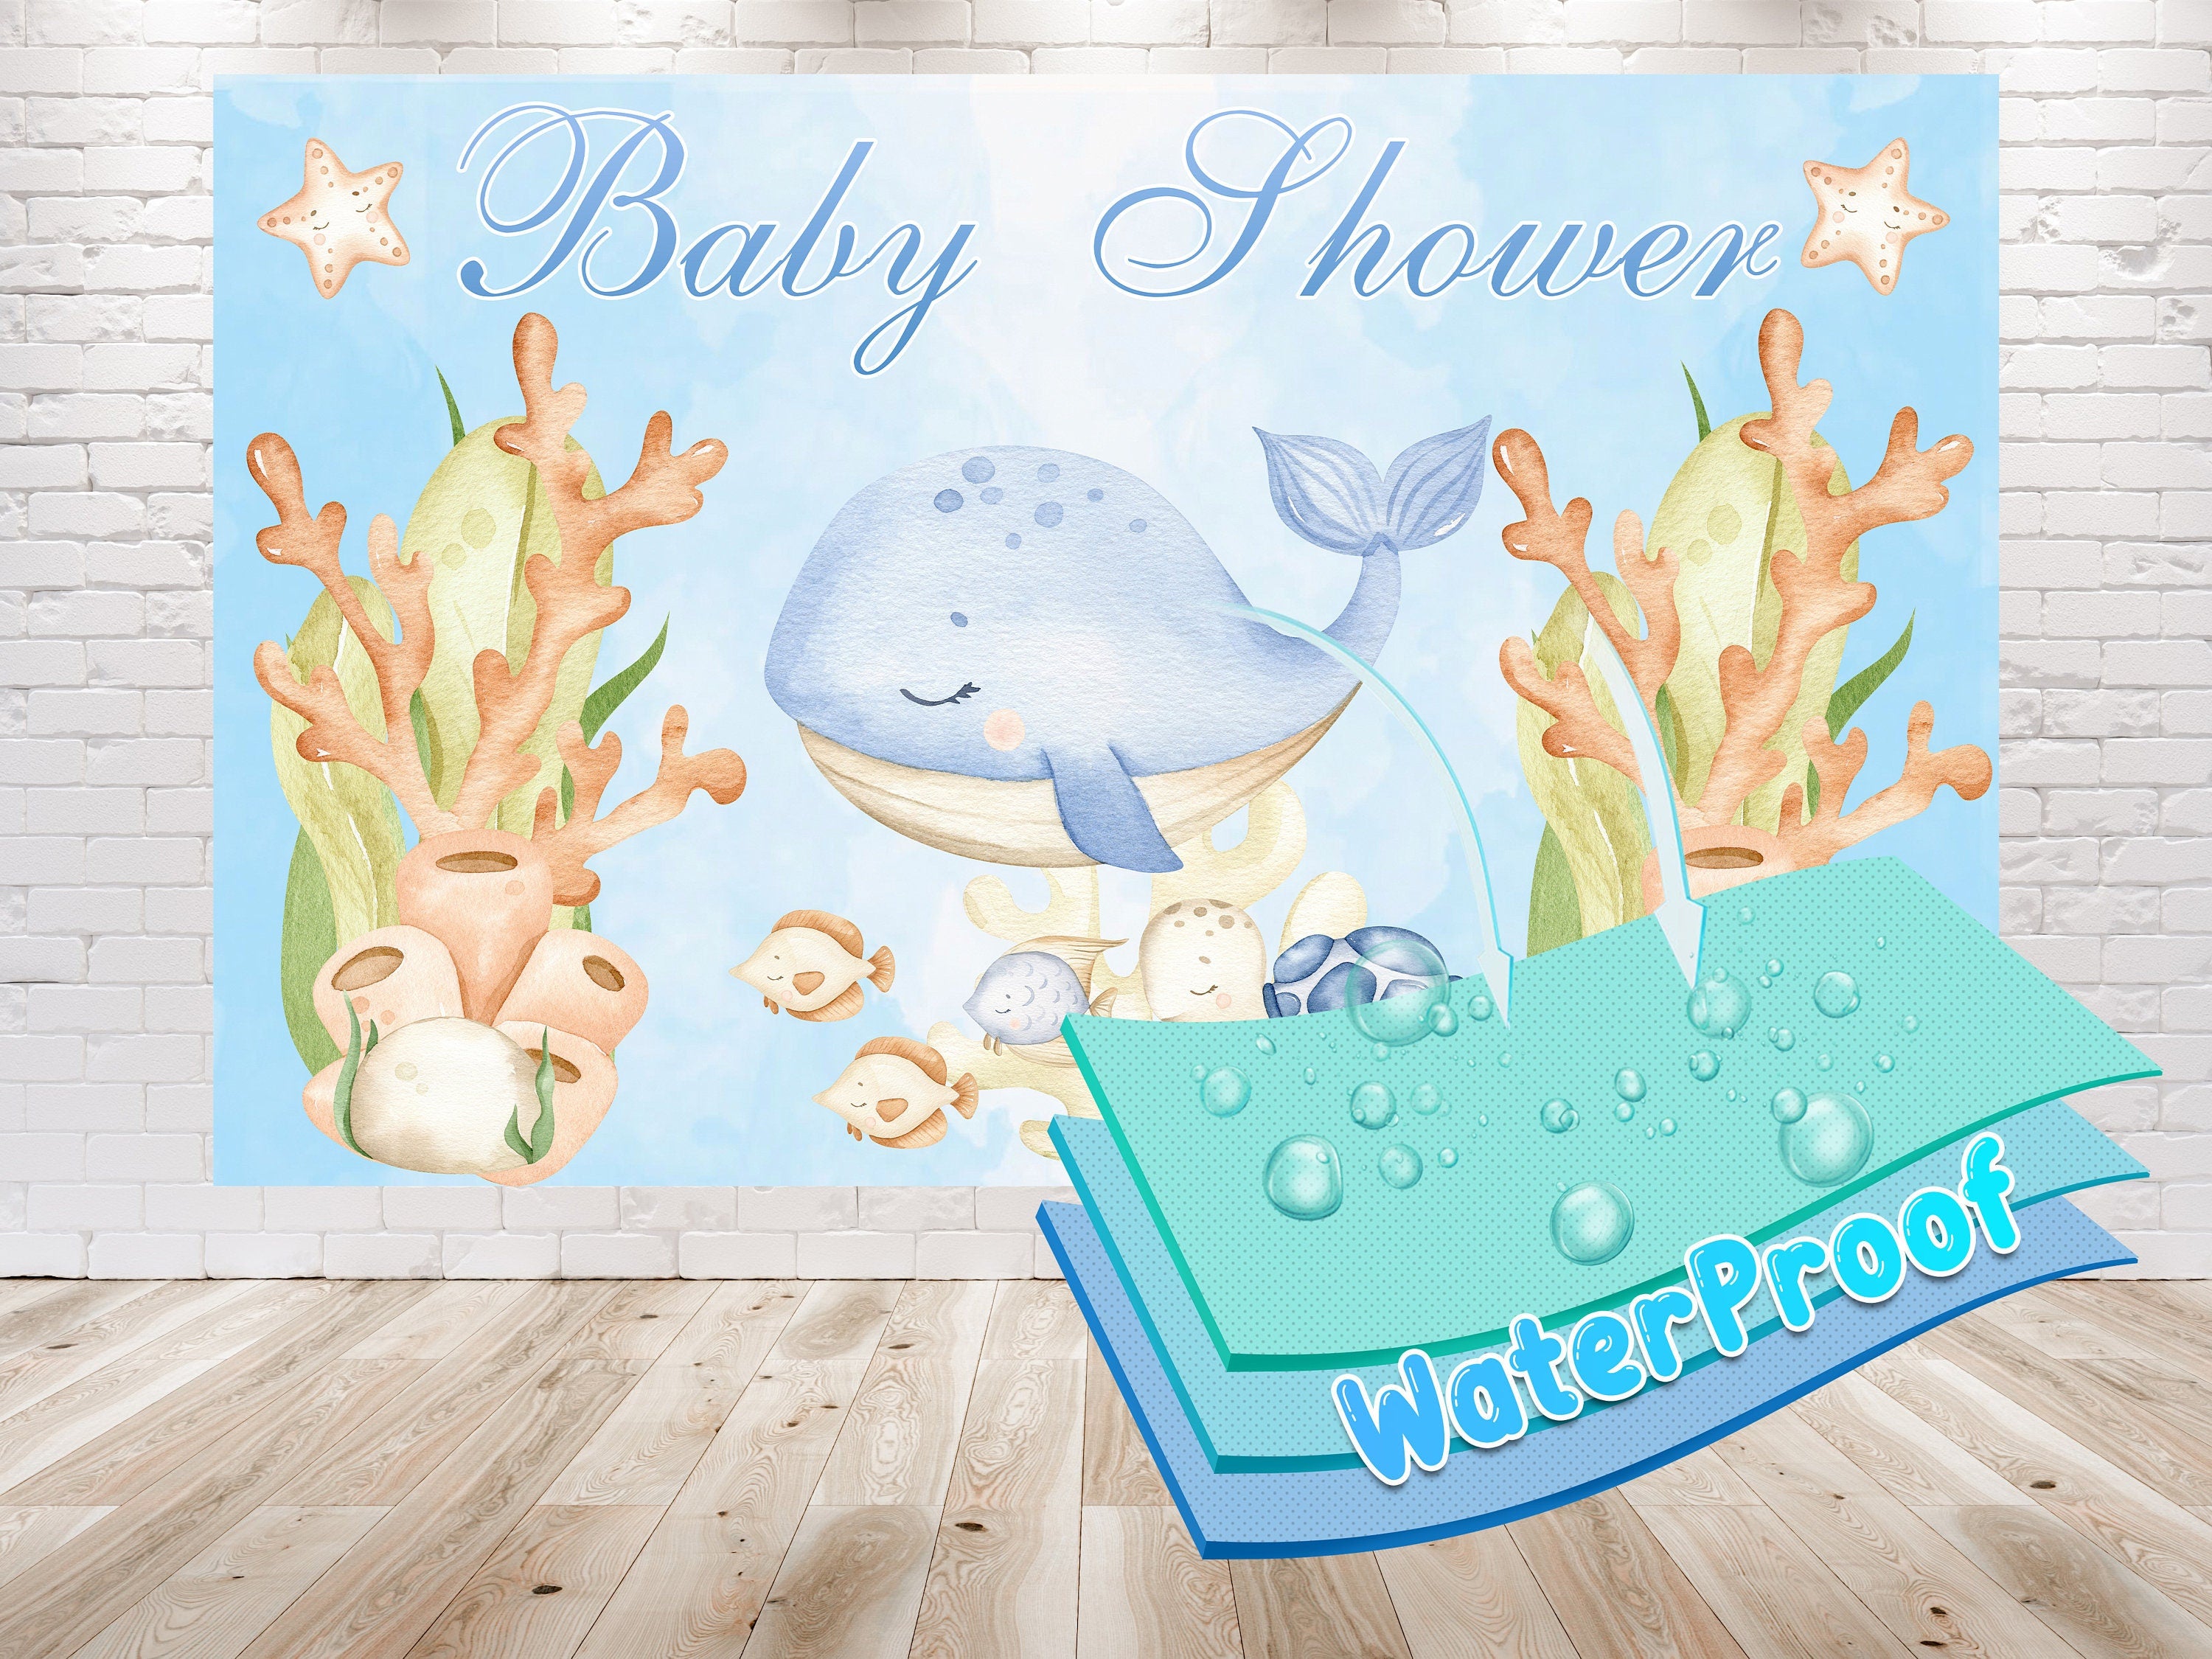 Under the Sea Baby Shower Backdrop 5x3 FT - Cute Ocean Theme Banner